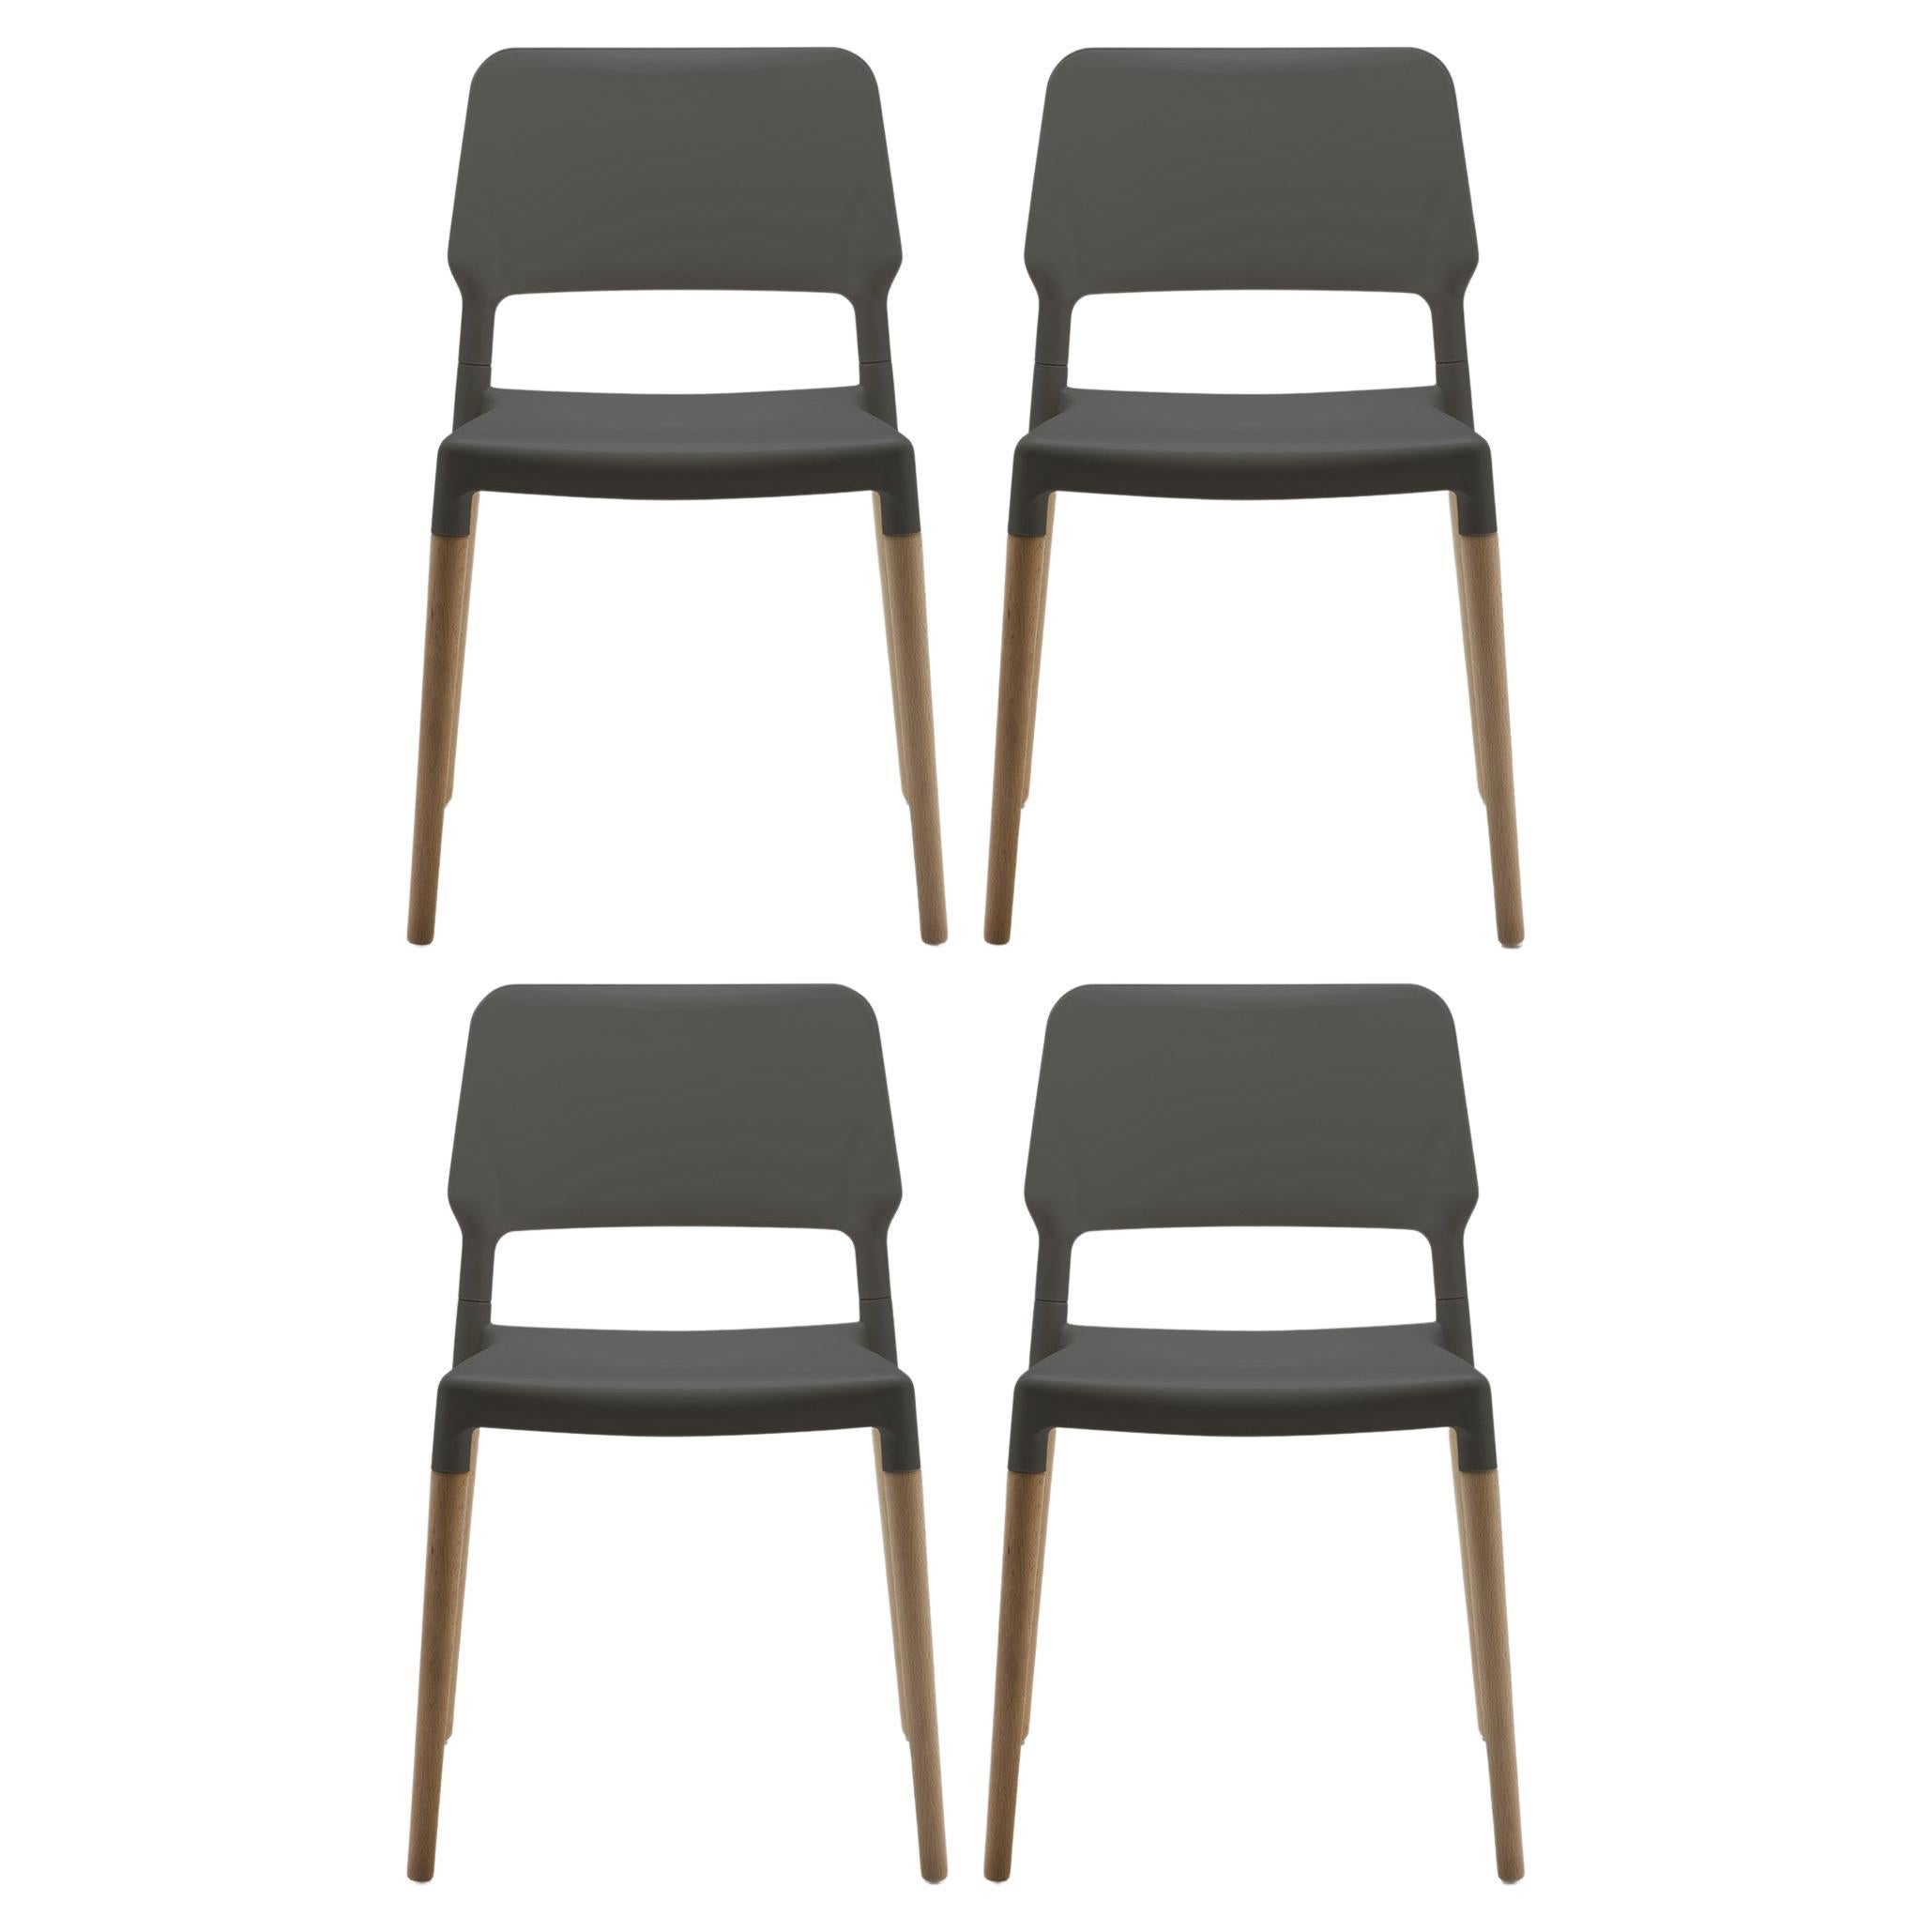 Set of 4 Belloch Dining Chair by Lagranja Design